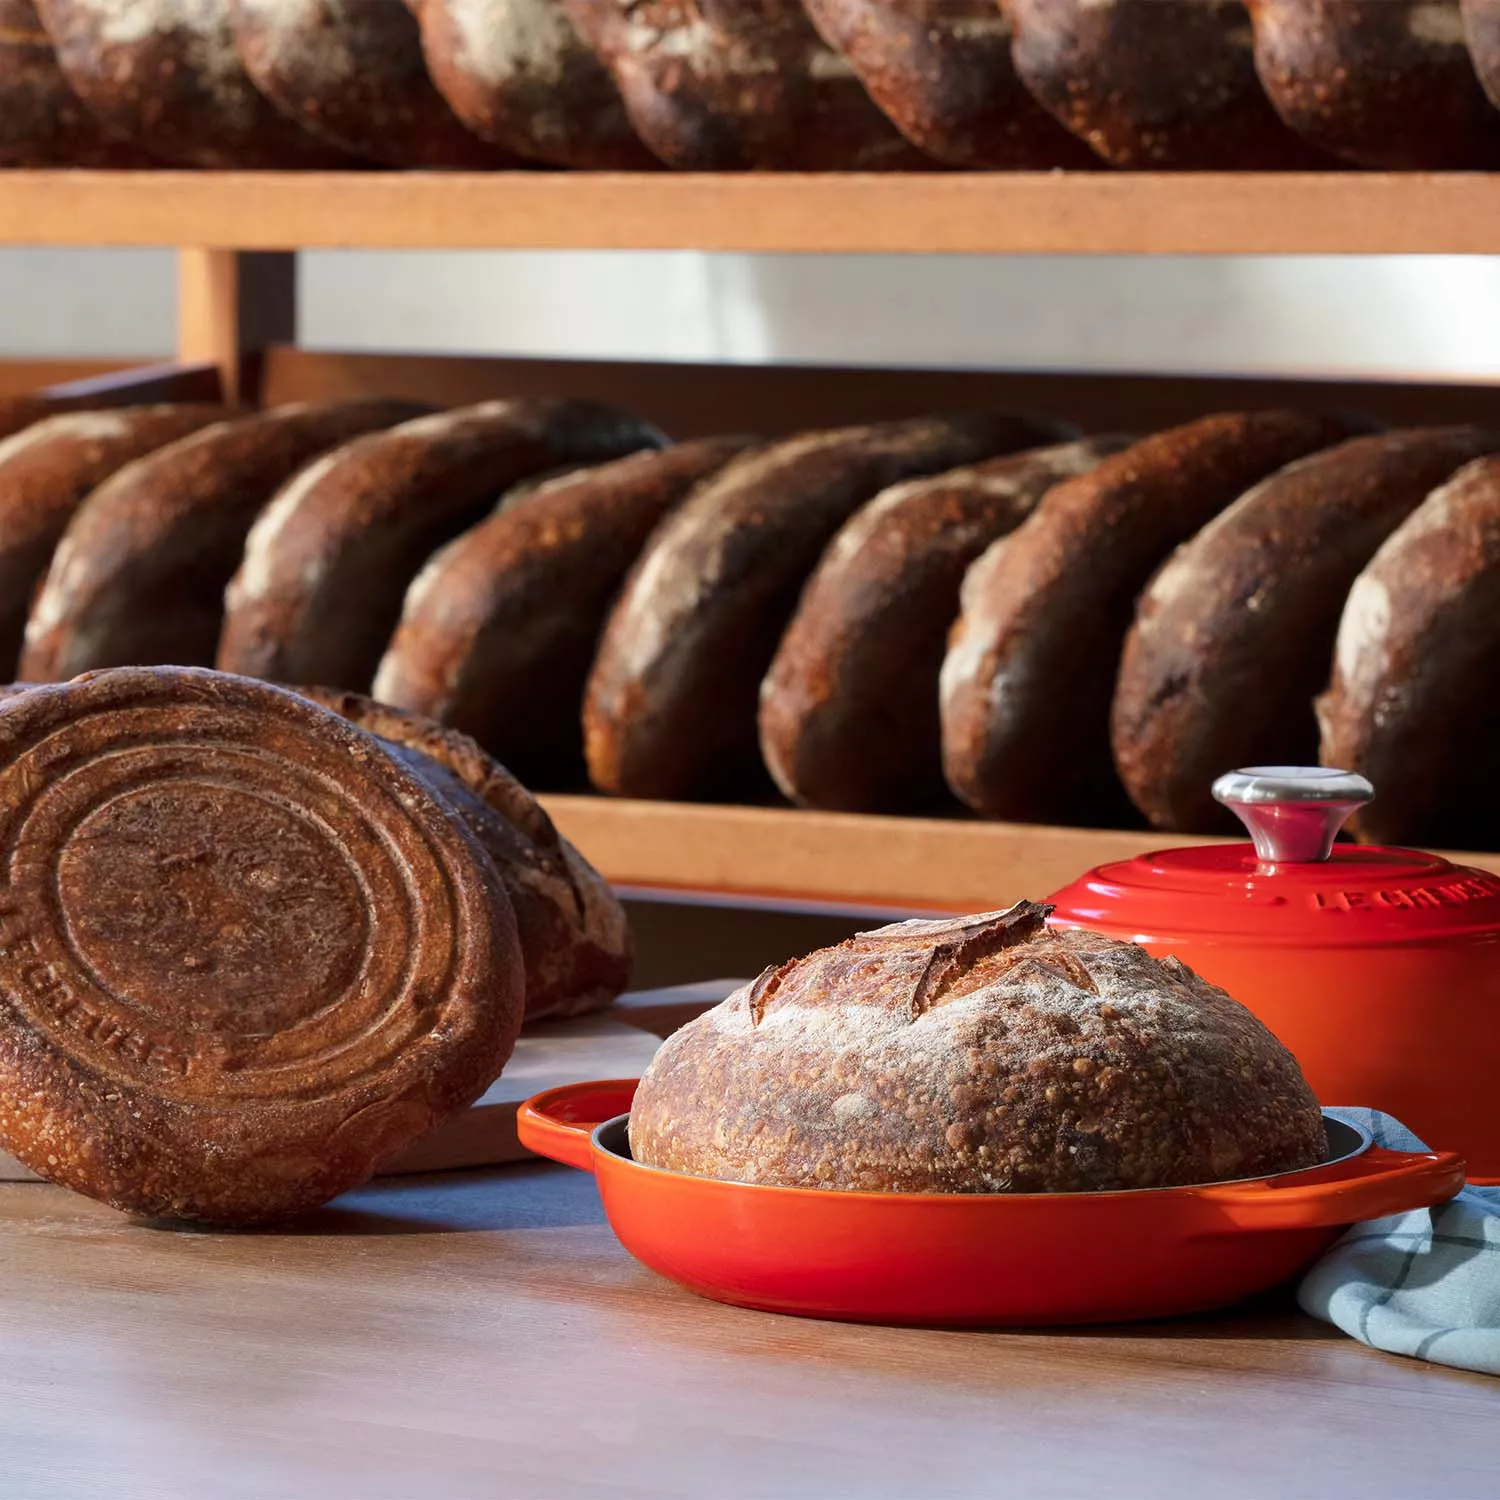 Le Creuset Bread Oven Review: Beautiful Loaves, for a Price